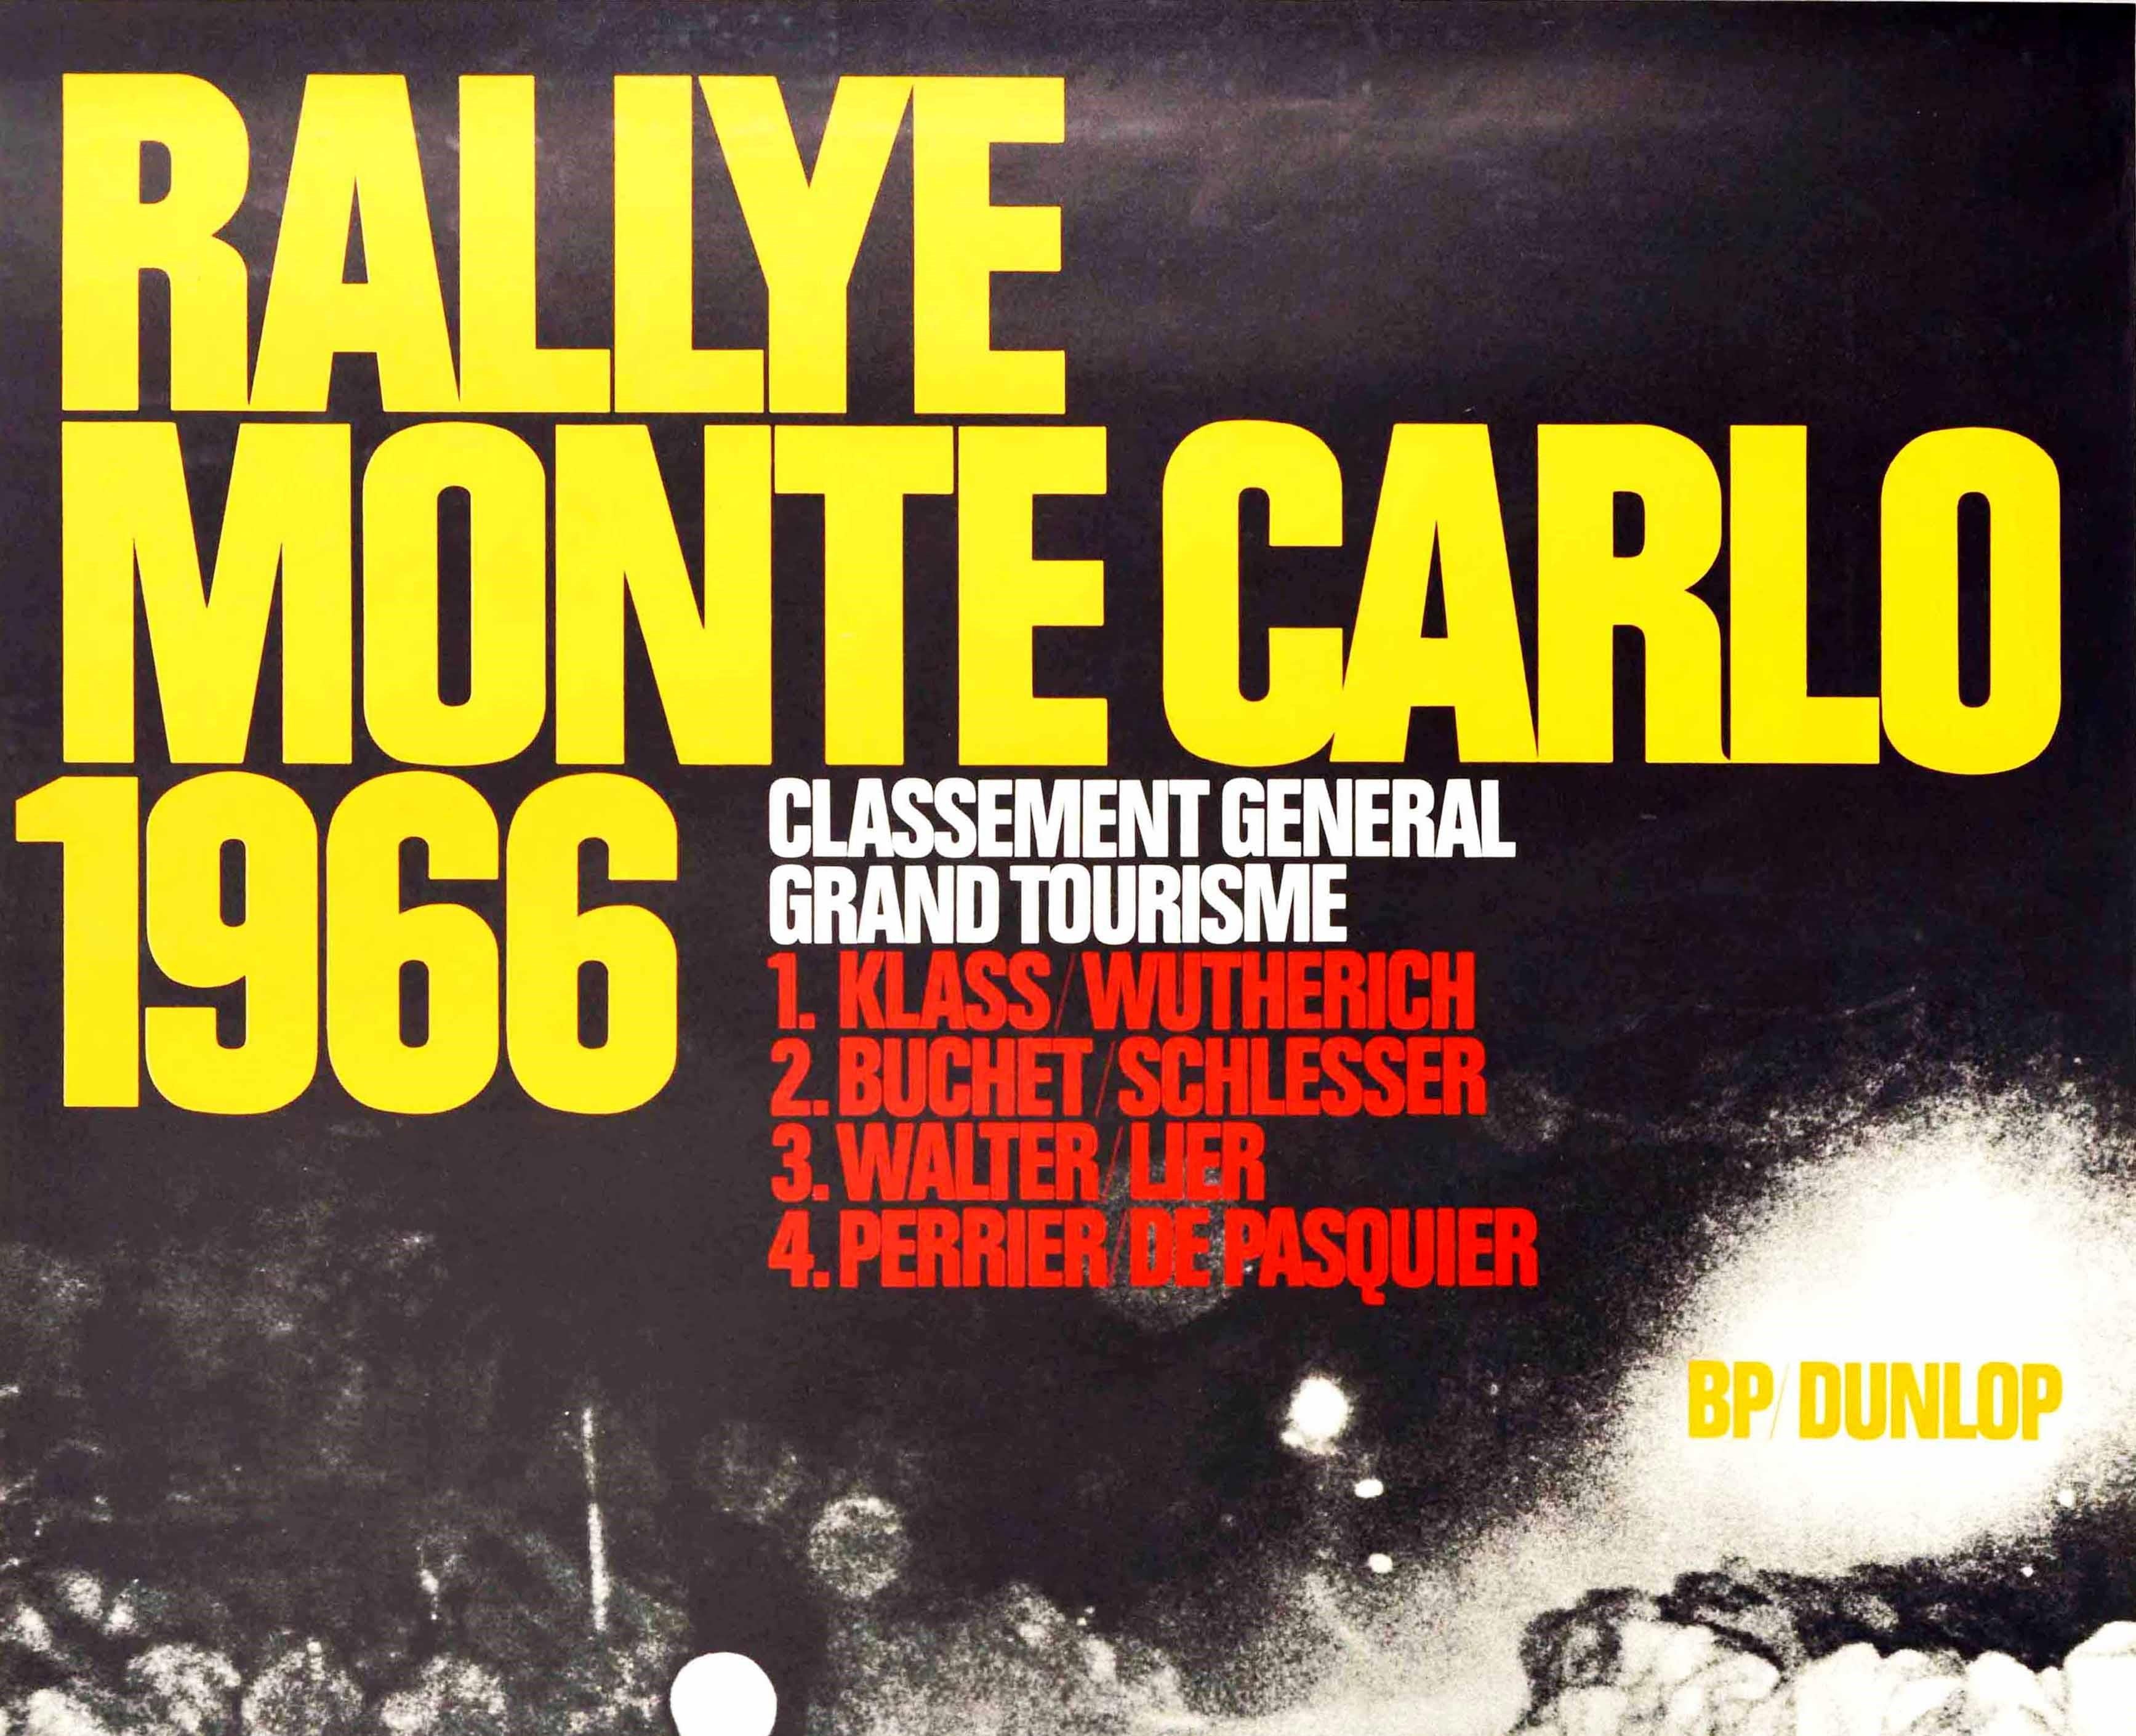 Original vintage motorsport poster for the victories by Porsche at the Rallye Monte Carlo 1966 featuring a black and white photo of a Porsche rally car racing on a road with the bold yellow title text and list of winning drivers in white and red